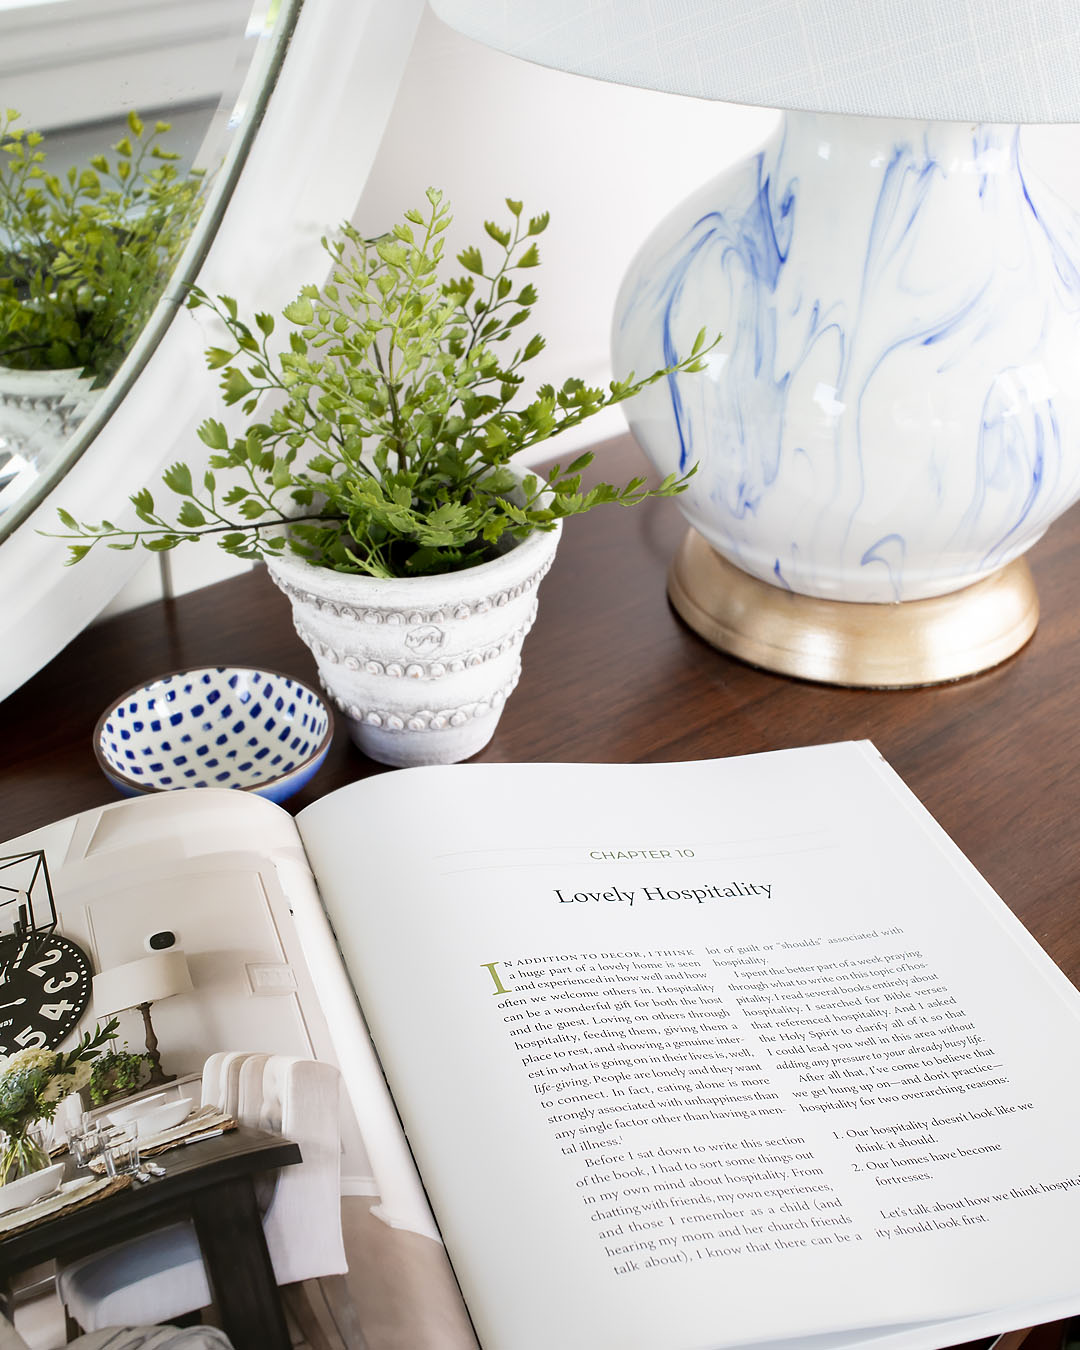 This is my review of Shannon Acheson's new Home Made Lovely book, a great book about decorating to create a home you love, and then sharing it with others.